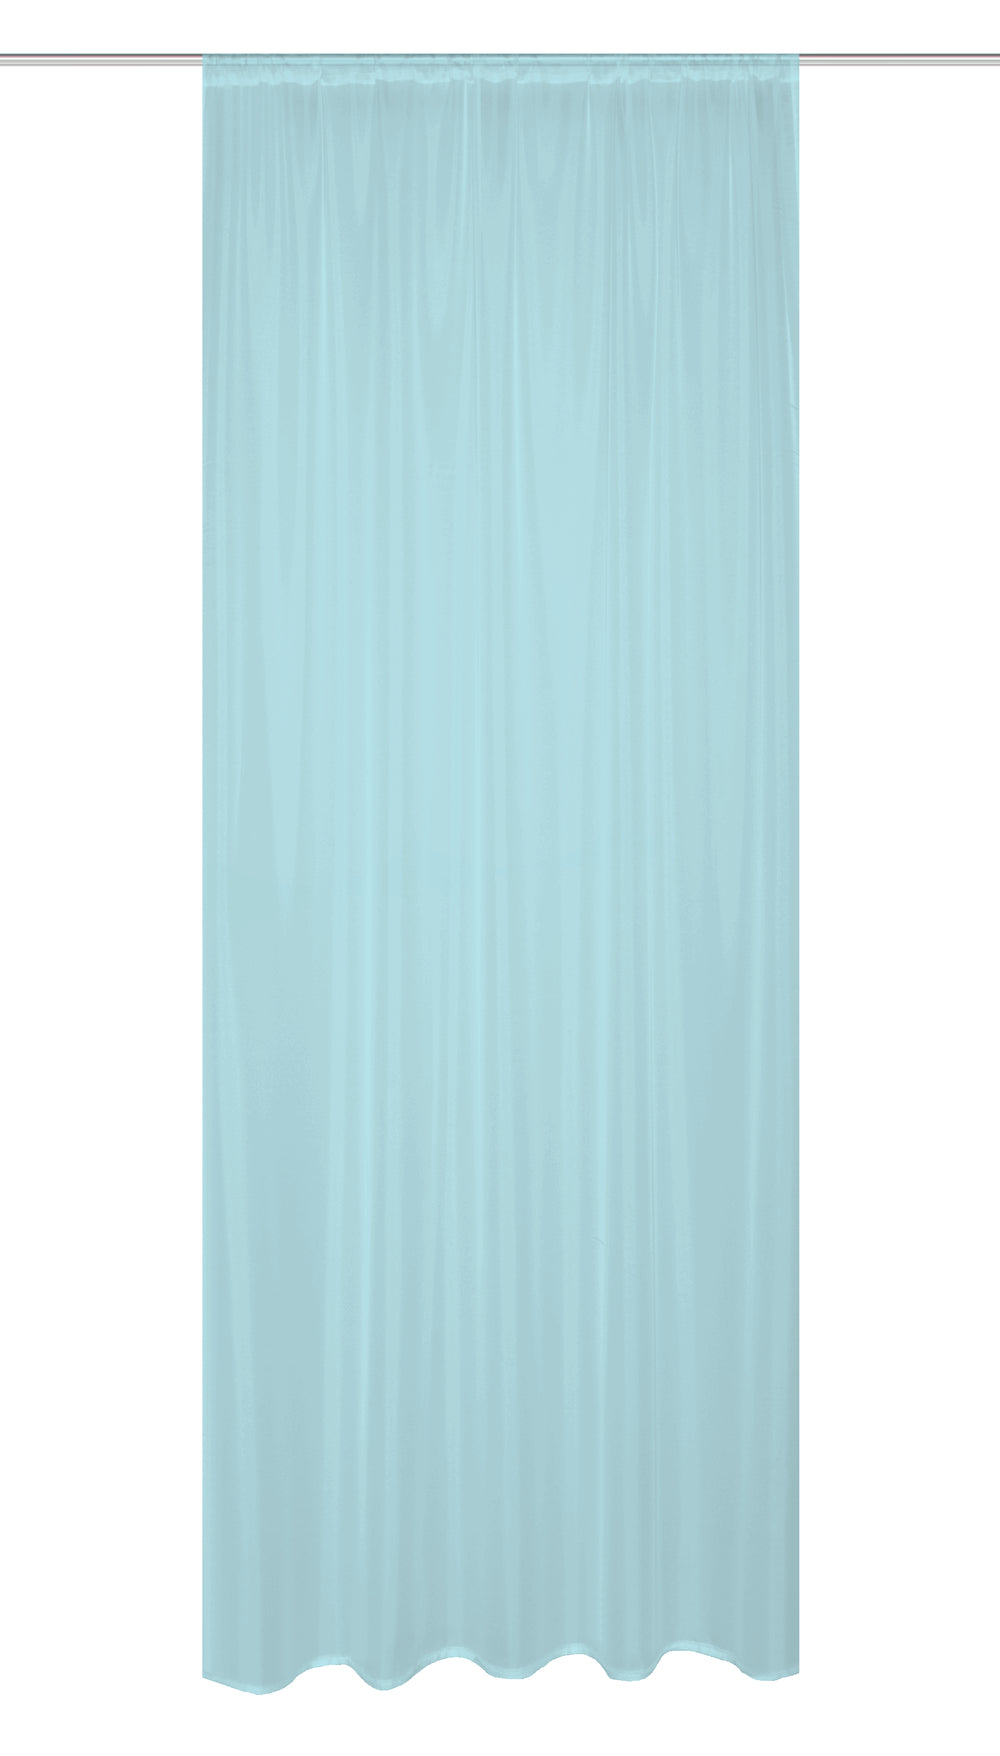 Day curtain turquoise Flo